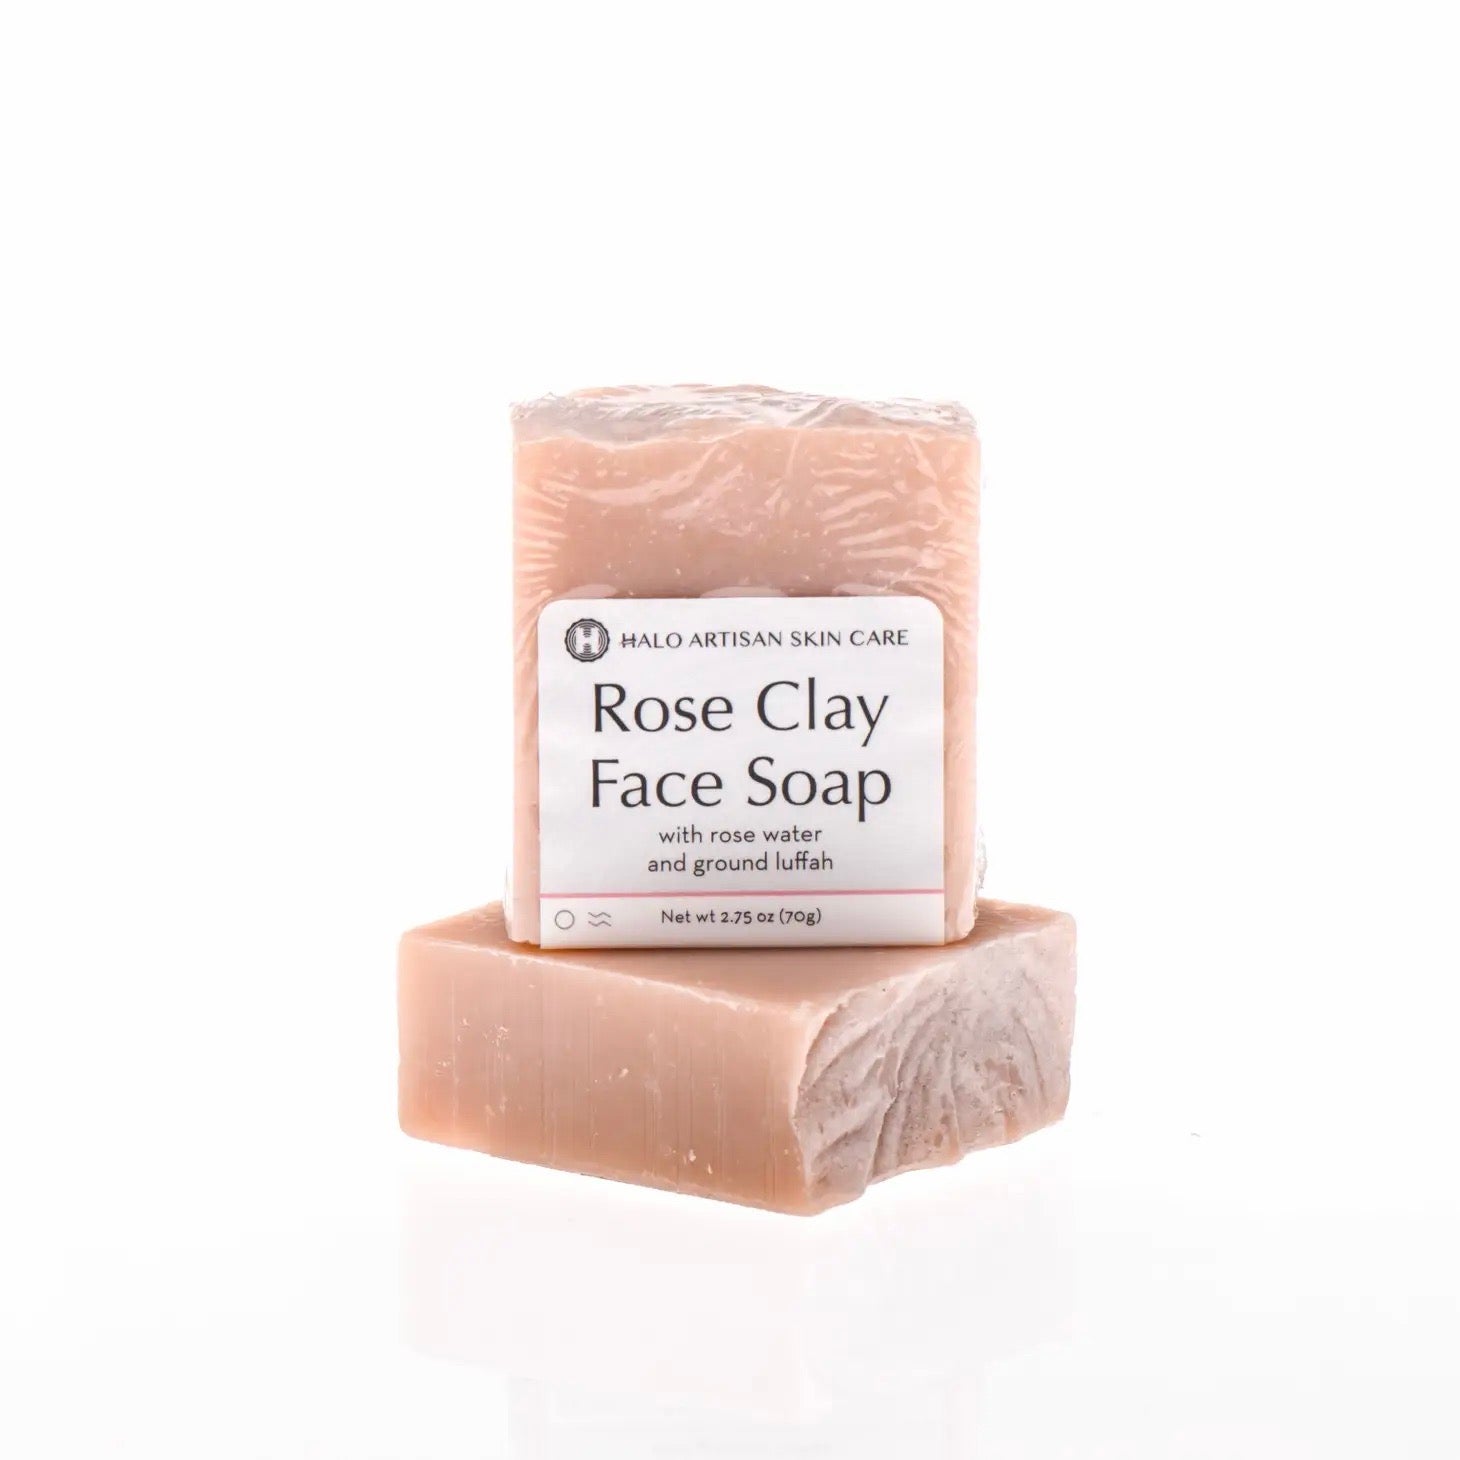 Rose Clay Face Soap